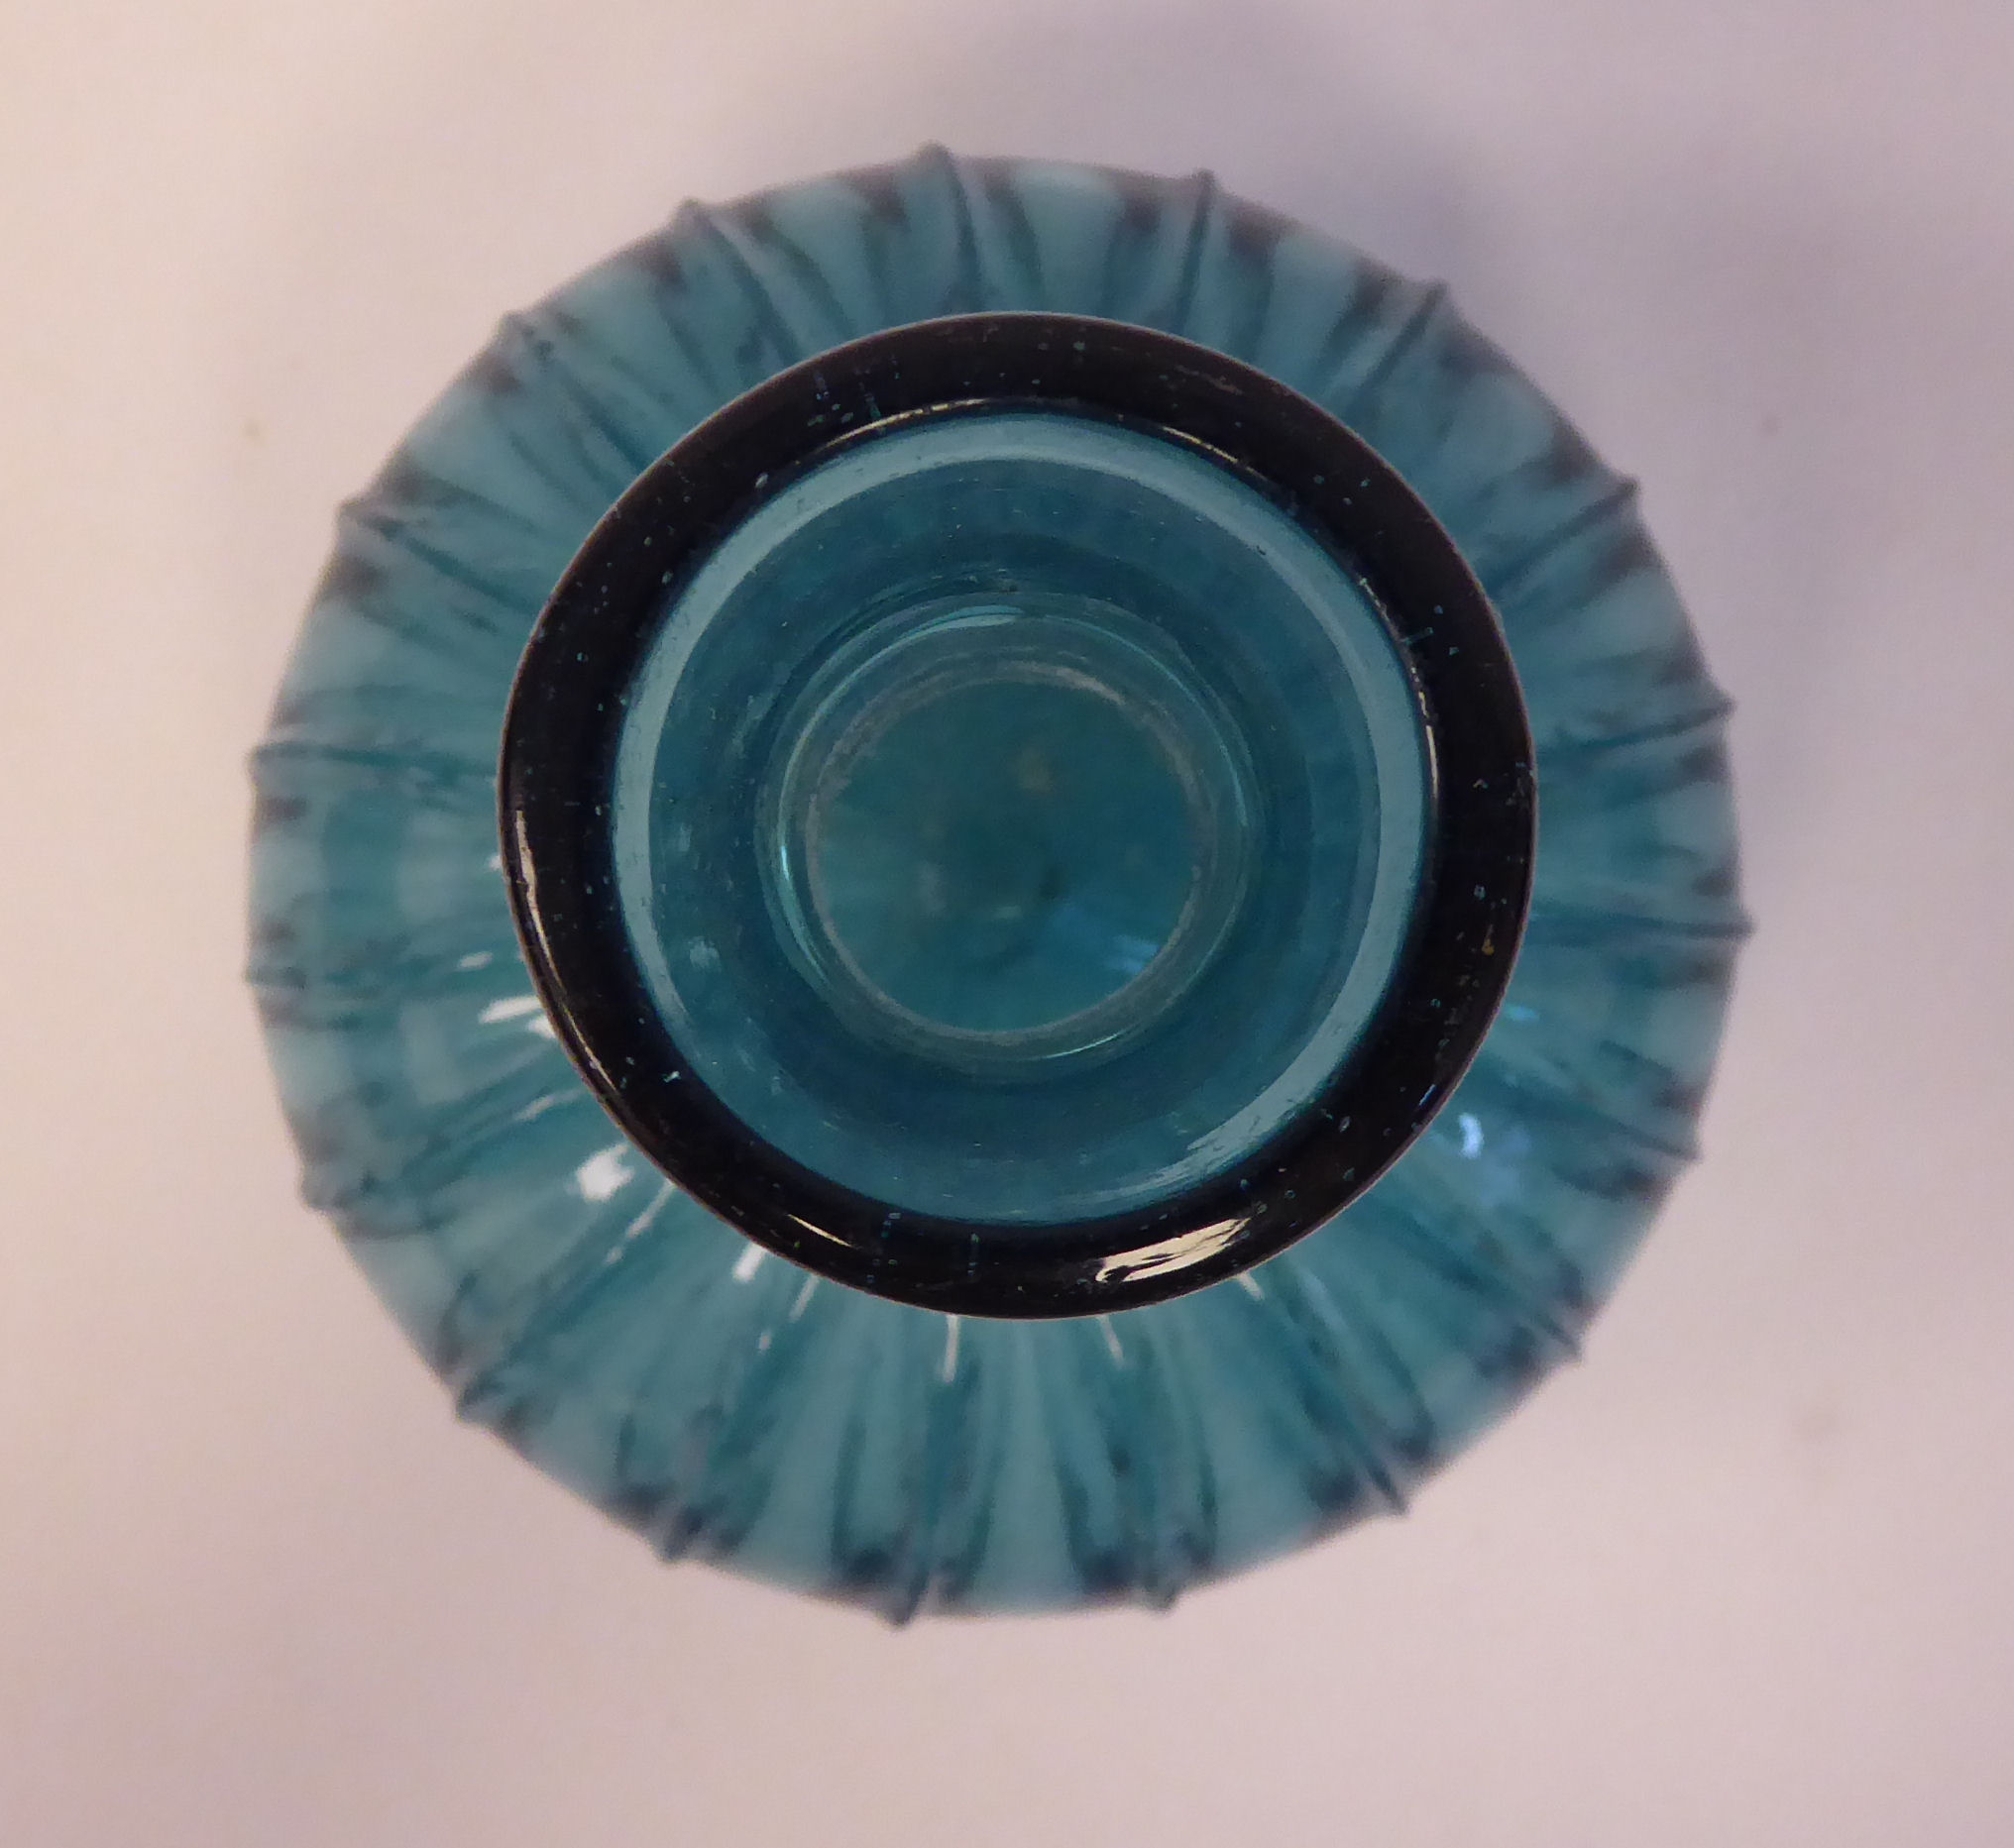 A 17thC Dutch semi-opaque turquoise glass bulbous and wide fluted bottle vase with a long, - Image 6 of 10